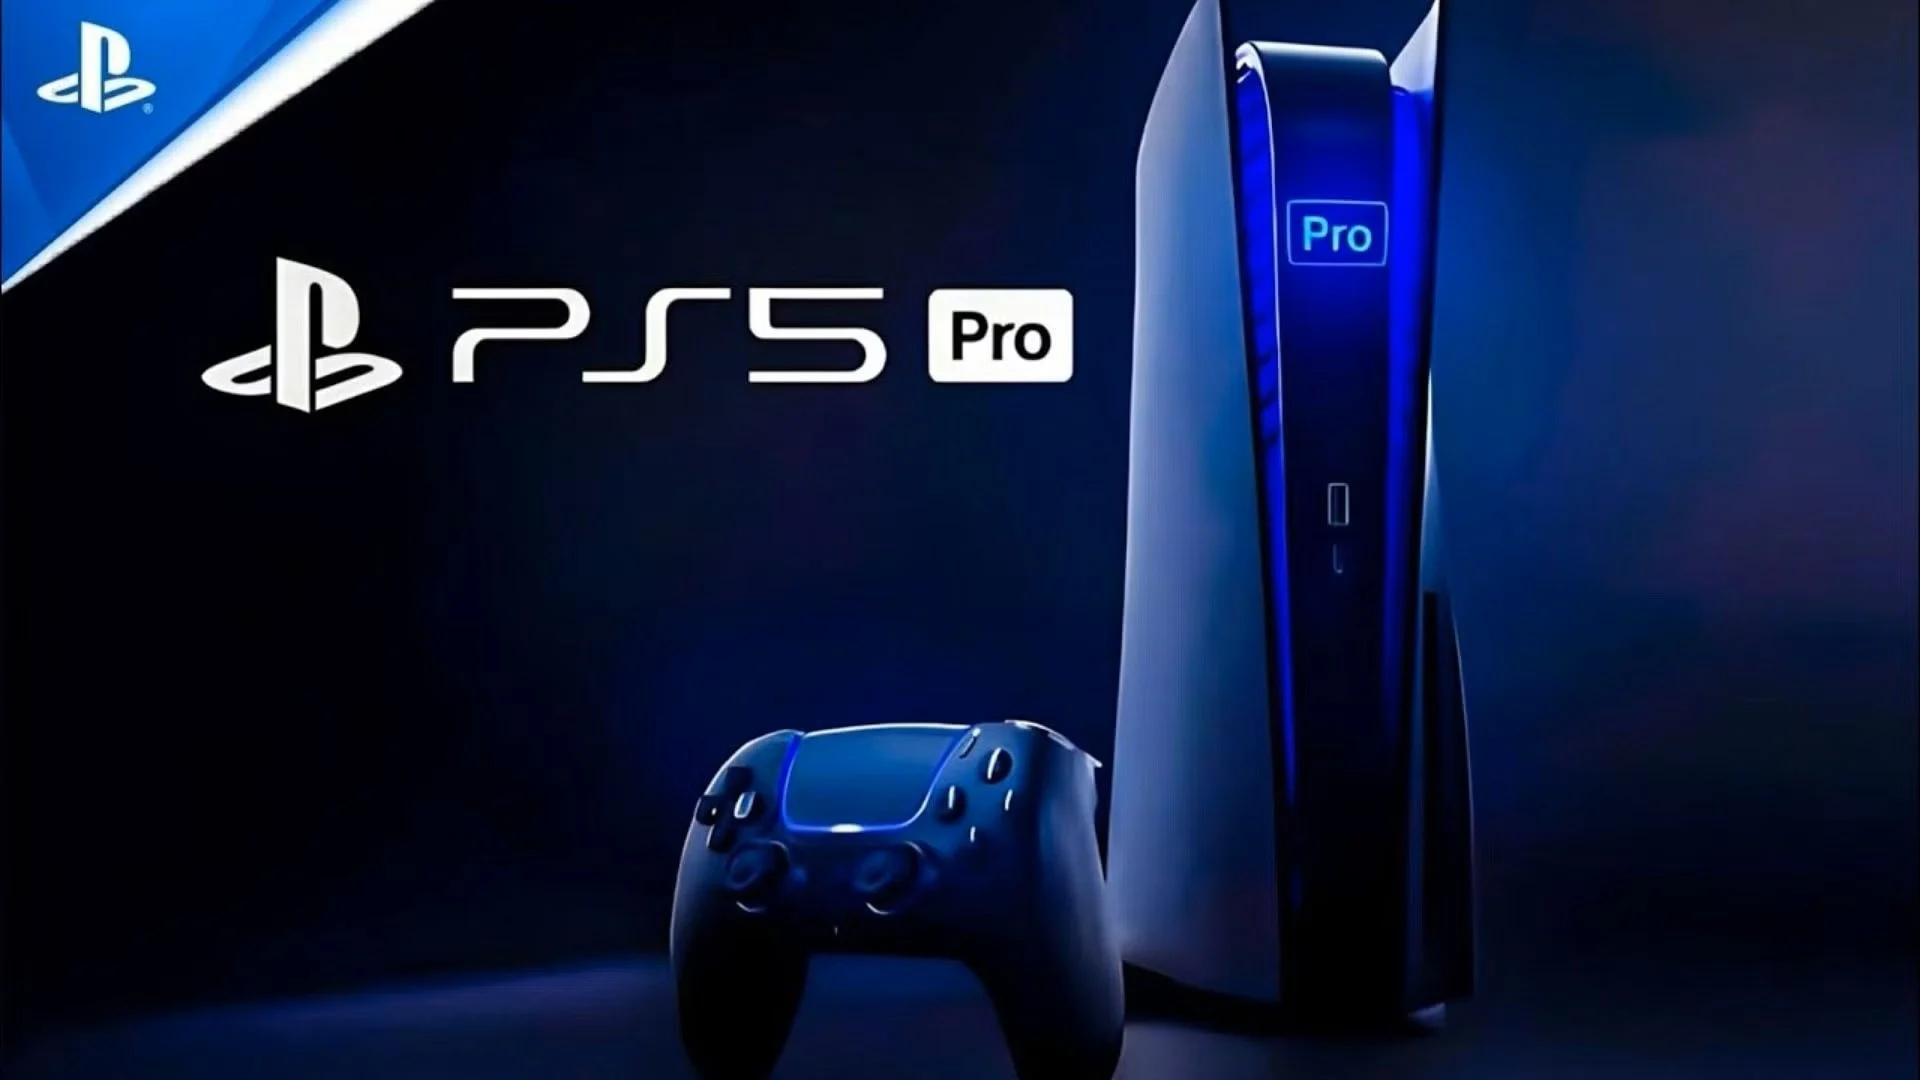 Breaking News: The PlayStation 5 Pro Is Set to Revolutionize Gaming With Next-Level Graphics and Speed